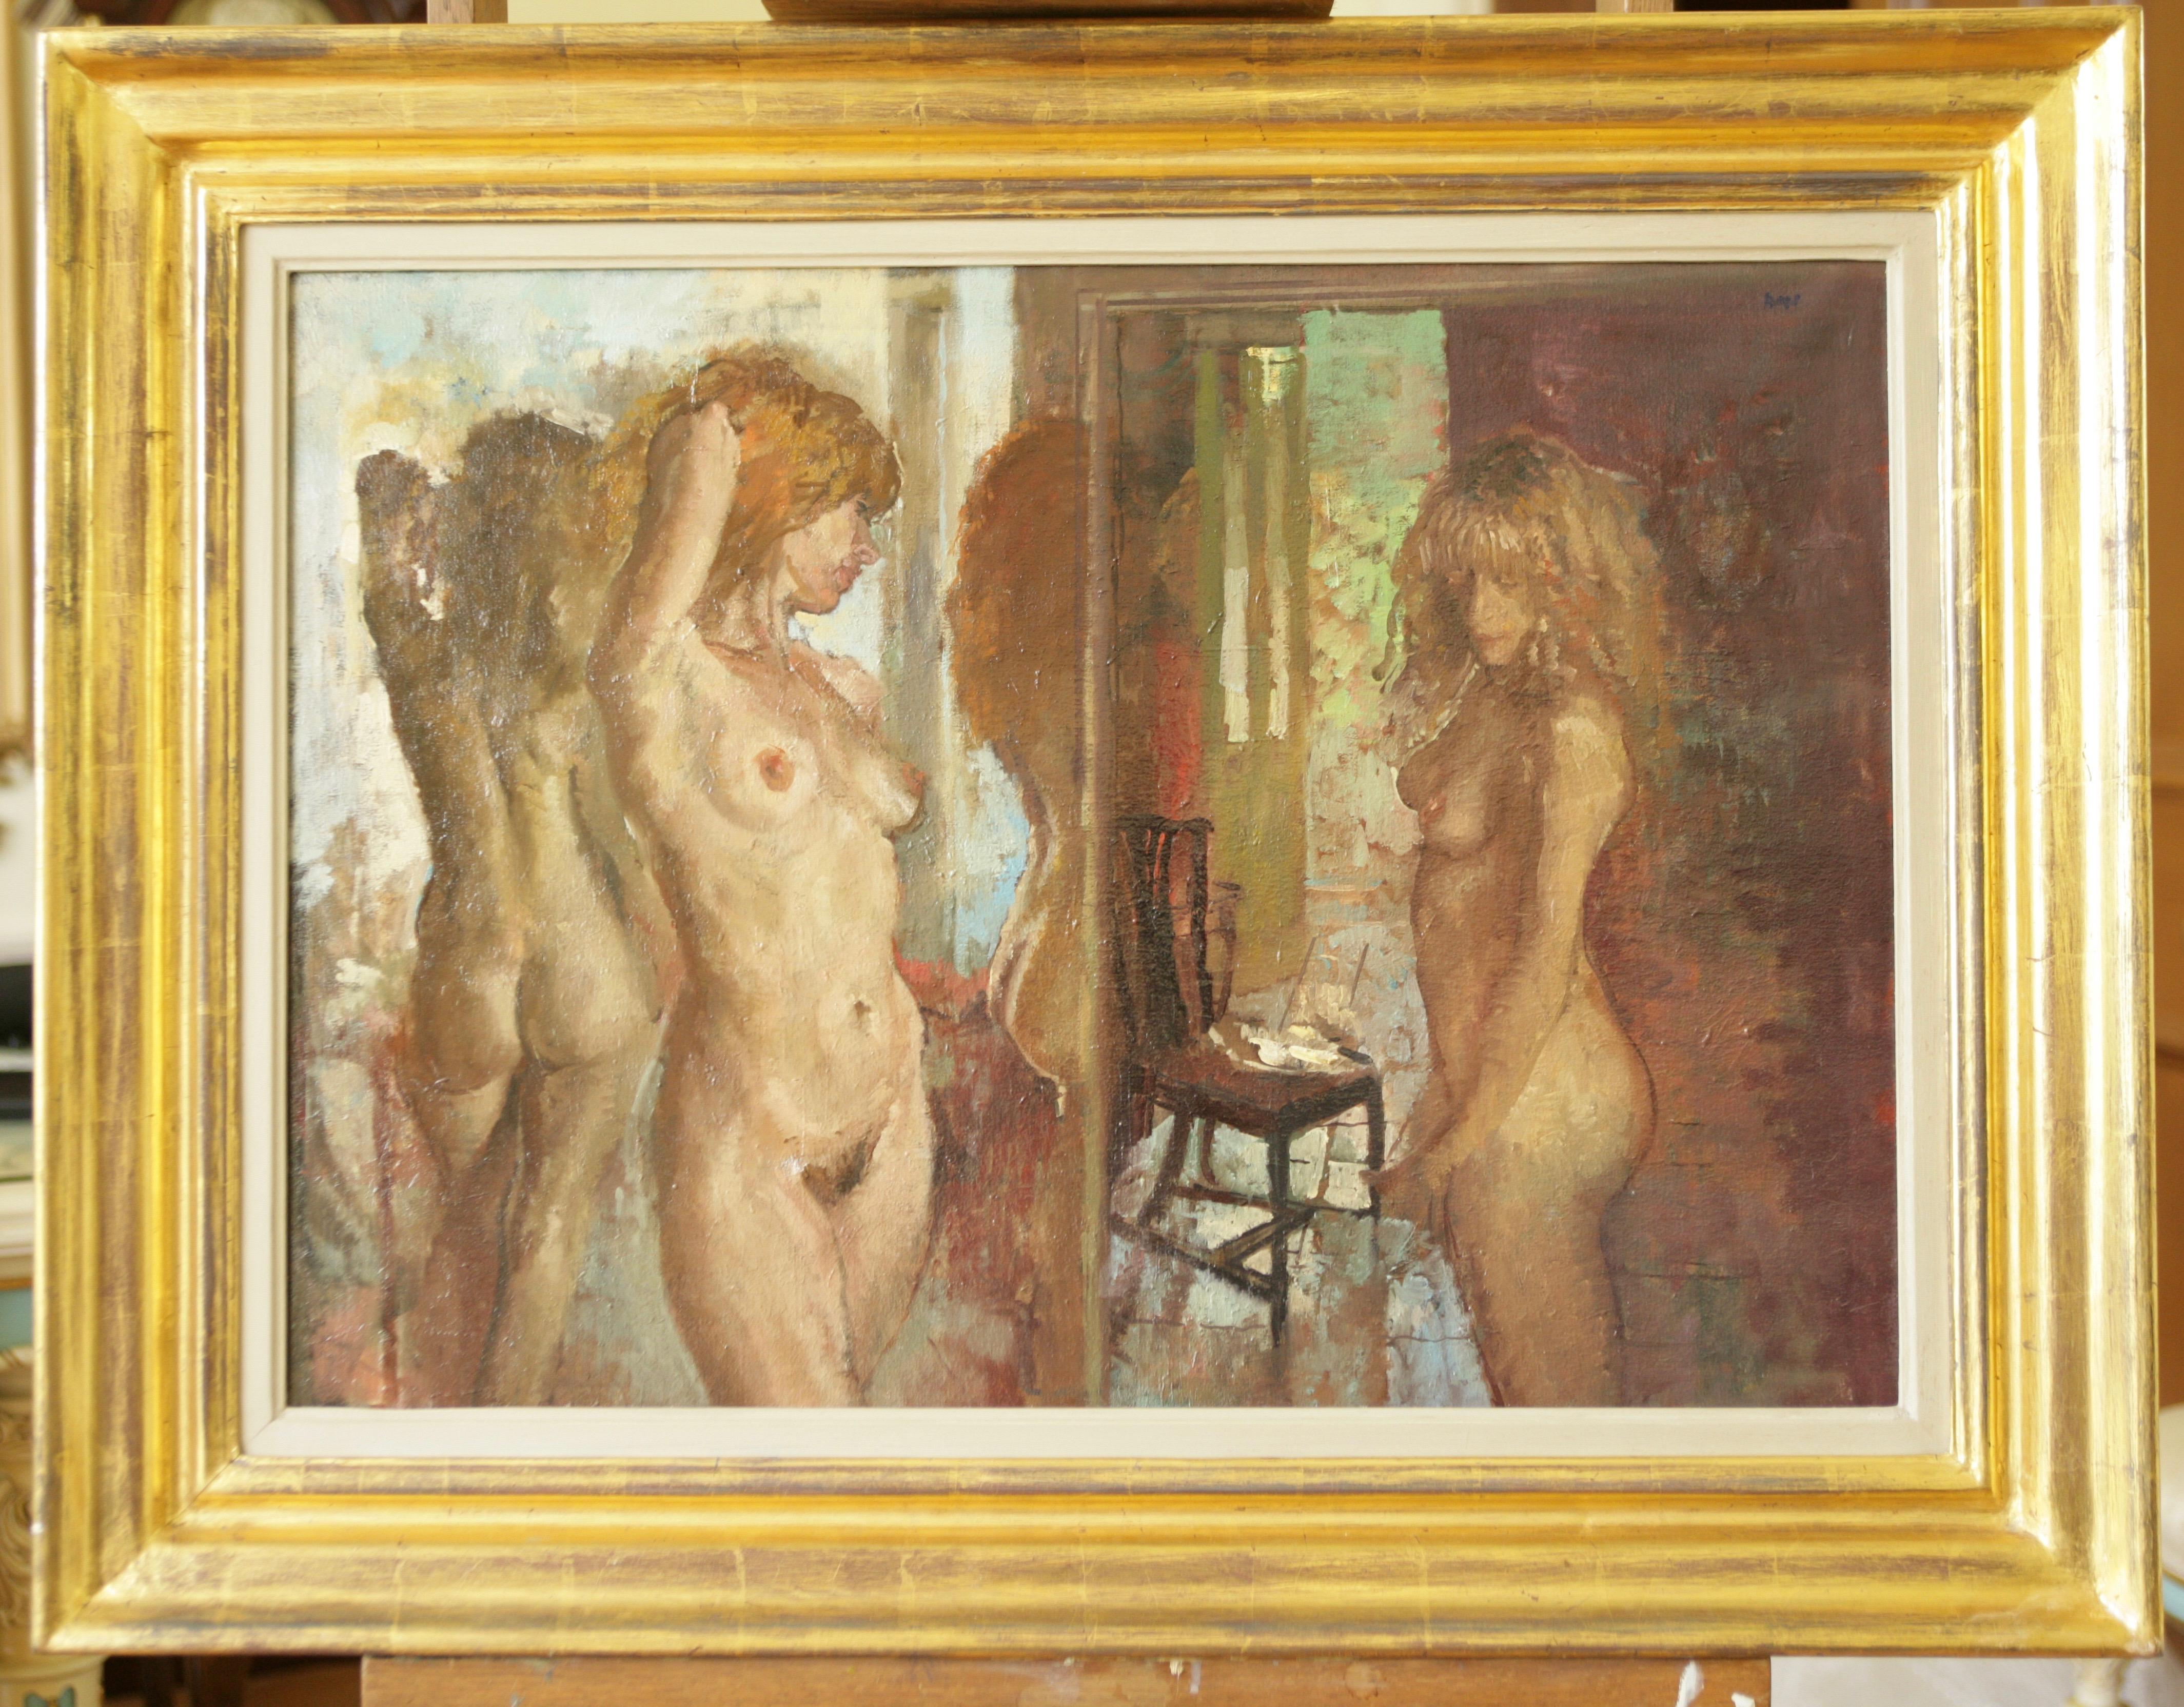 MODELS in front of the MIRROR PETER KUHFELD CONTEMPORARY BRITISH ARTIST - Impressionist Painting by Peter Kuhfeld